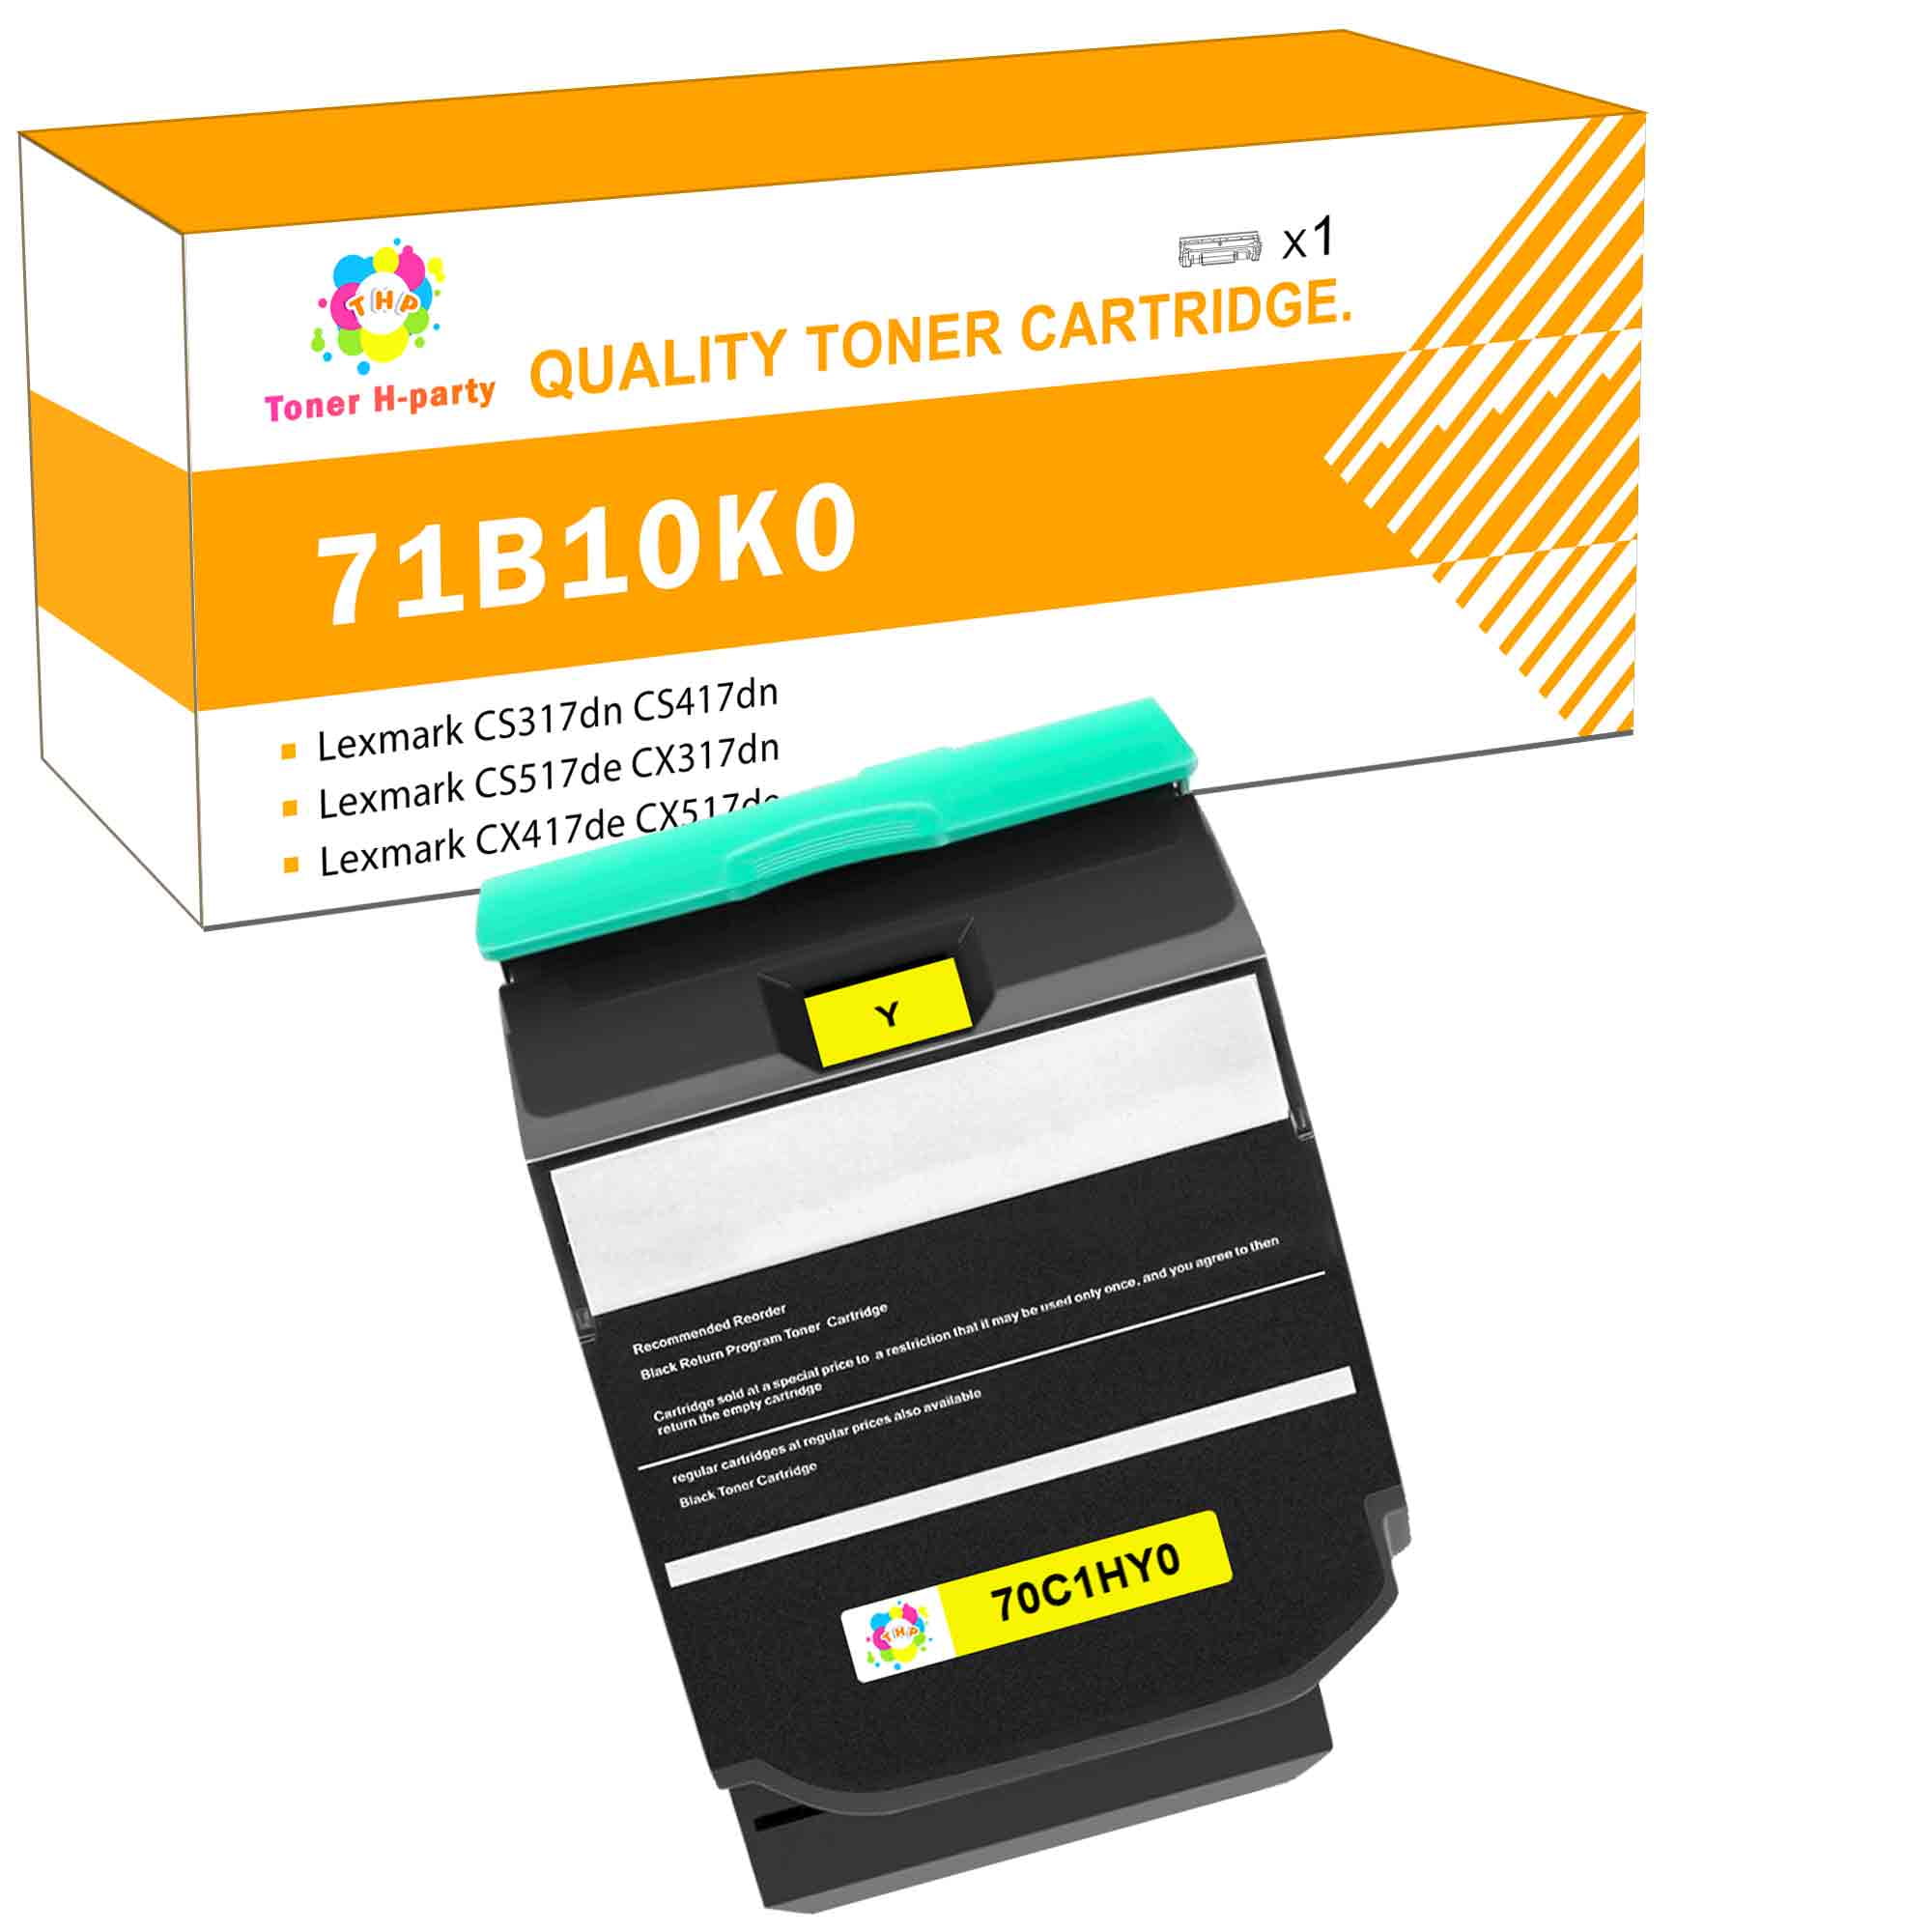 død dråbe Kyst Toner H-Party Compatible Toner Cartridge Replacement for Lexmark 71B10Y0  for Use with Lexmark CS317dn CS417dn CS517de Printer Ink (Yellow,1-Pack) -  Walmart.com